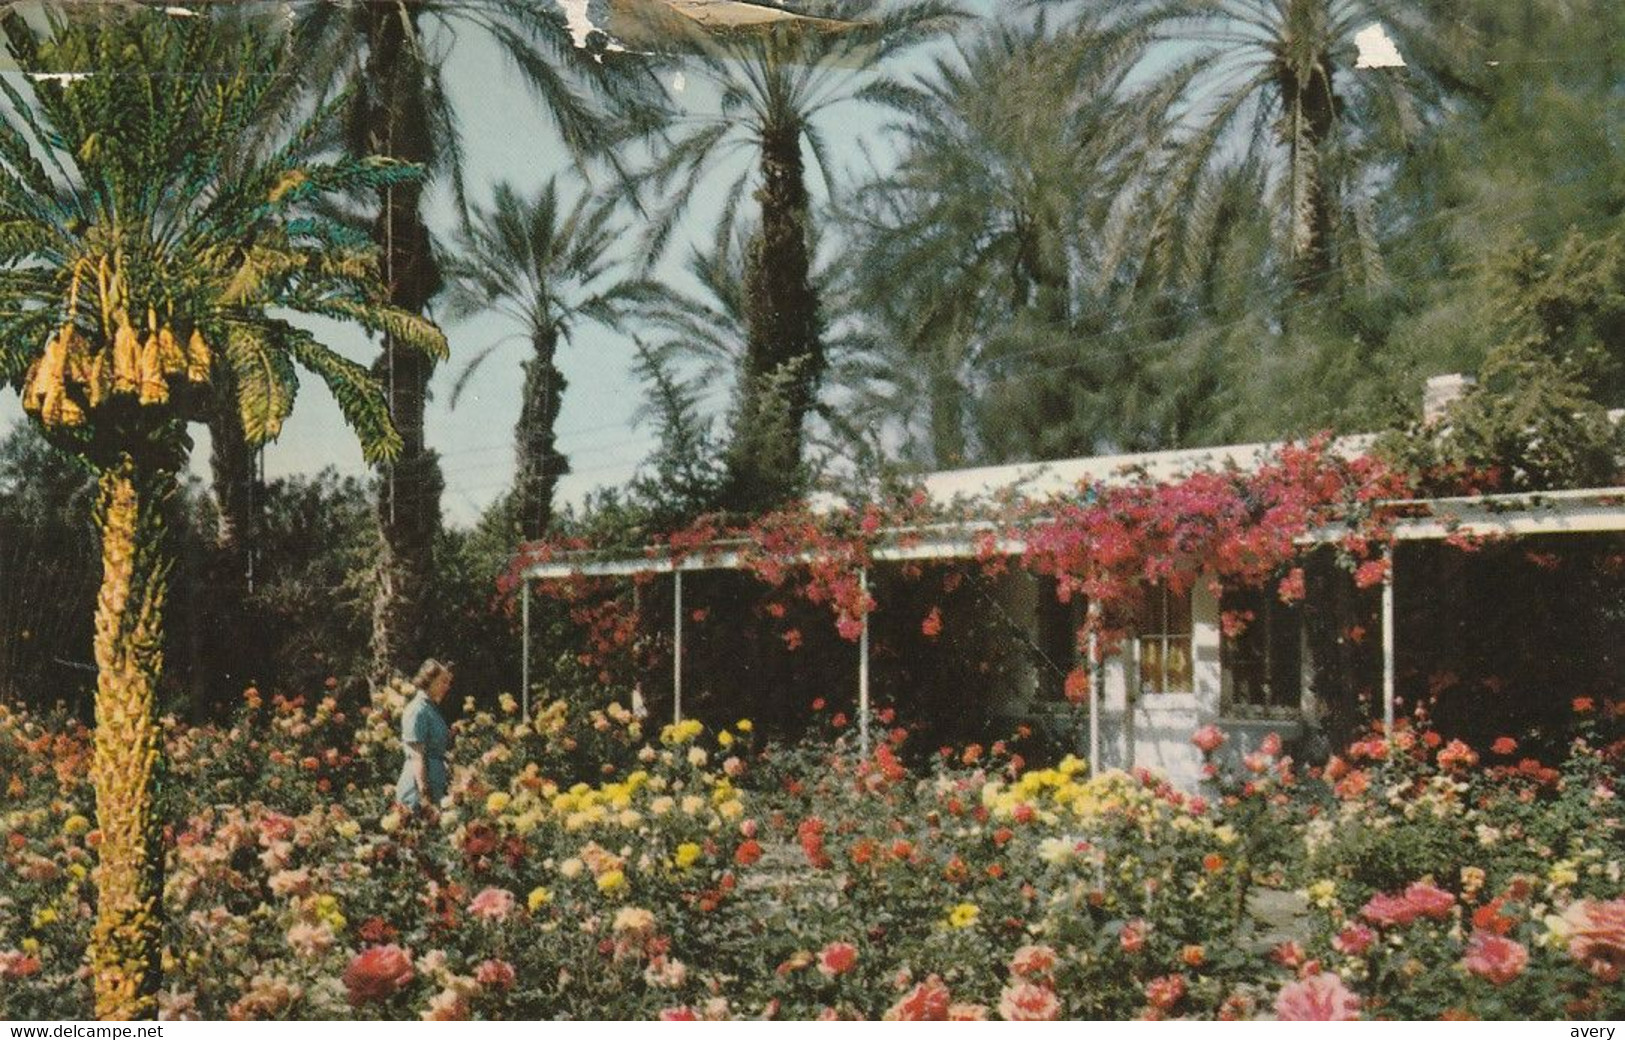 Palm Springs And Coachella Valley Visitors Are Enjoying Sunshine And Beautiful Flowers Amid The Stately Date Palms - Palm Springs